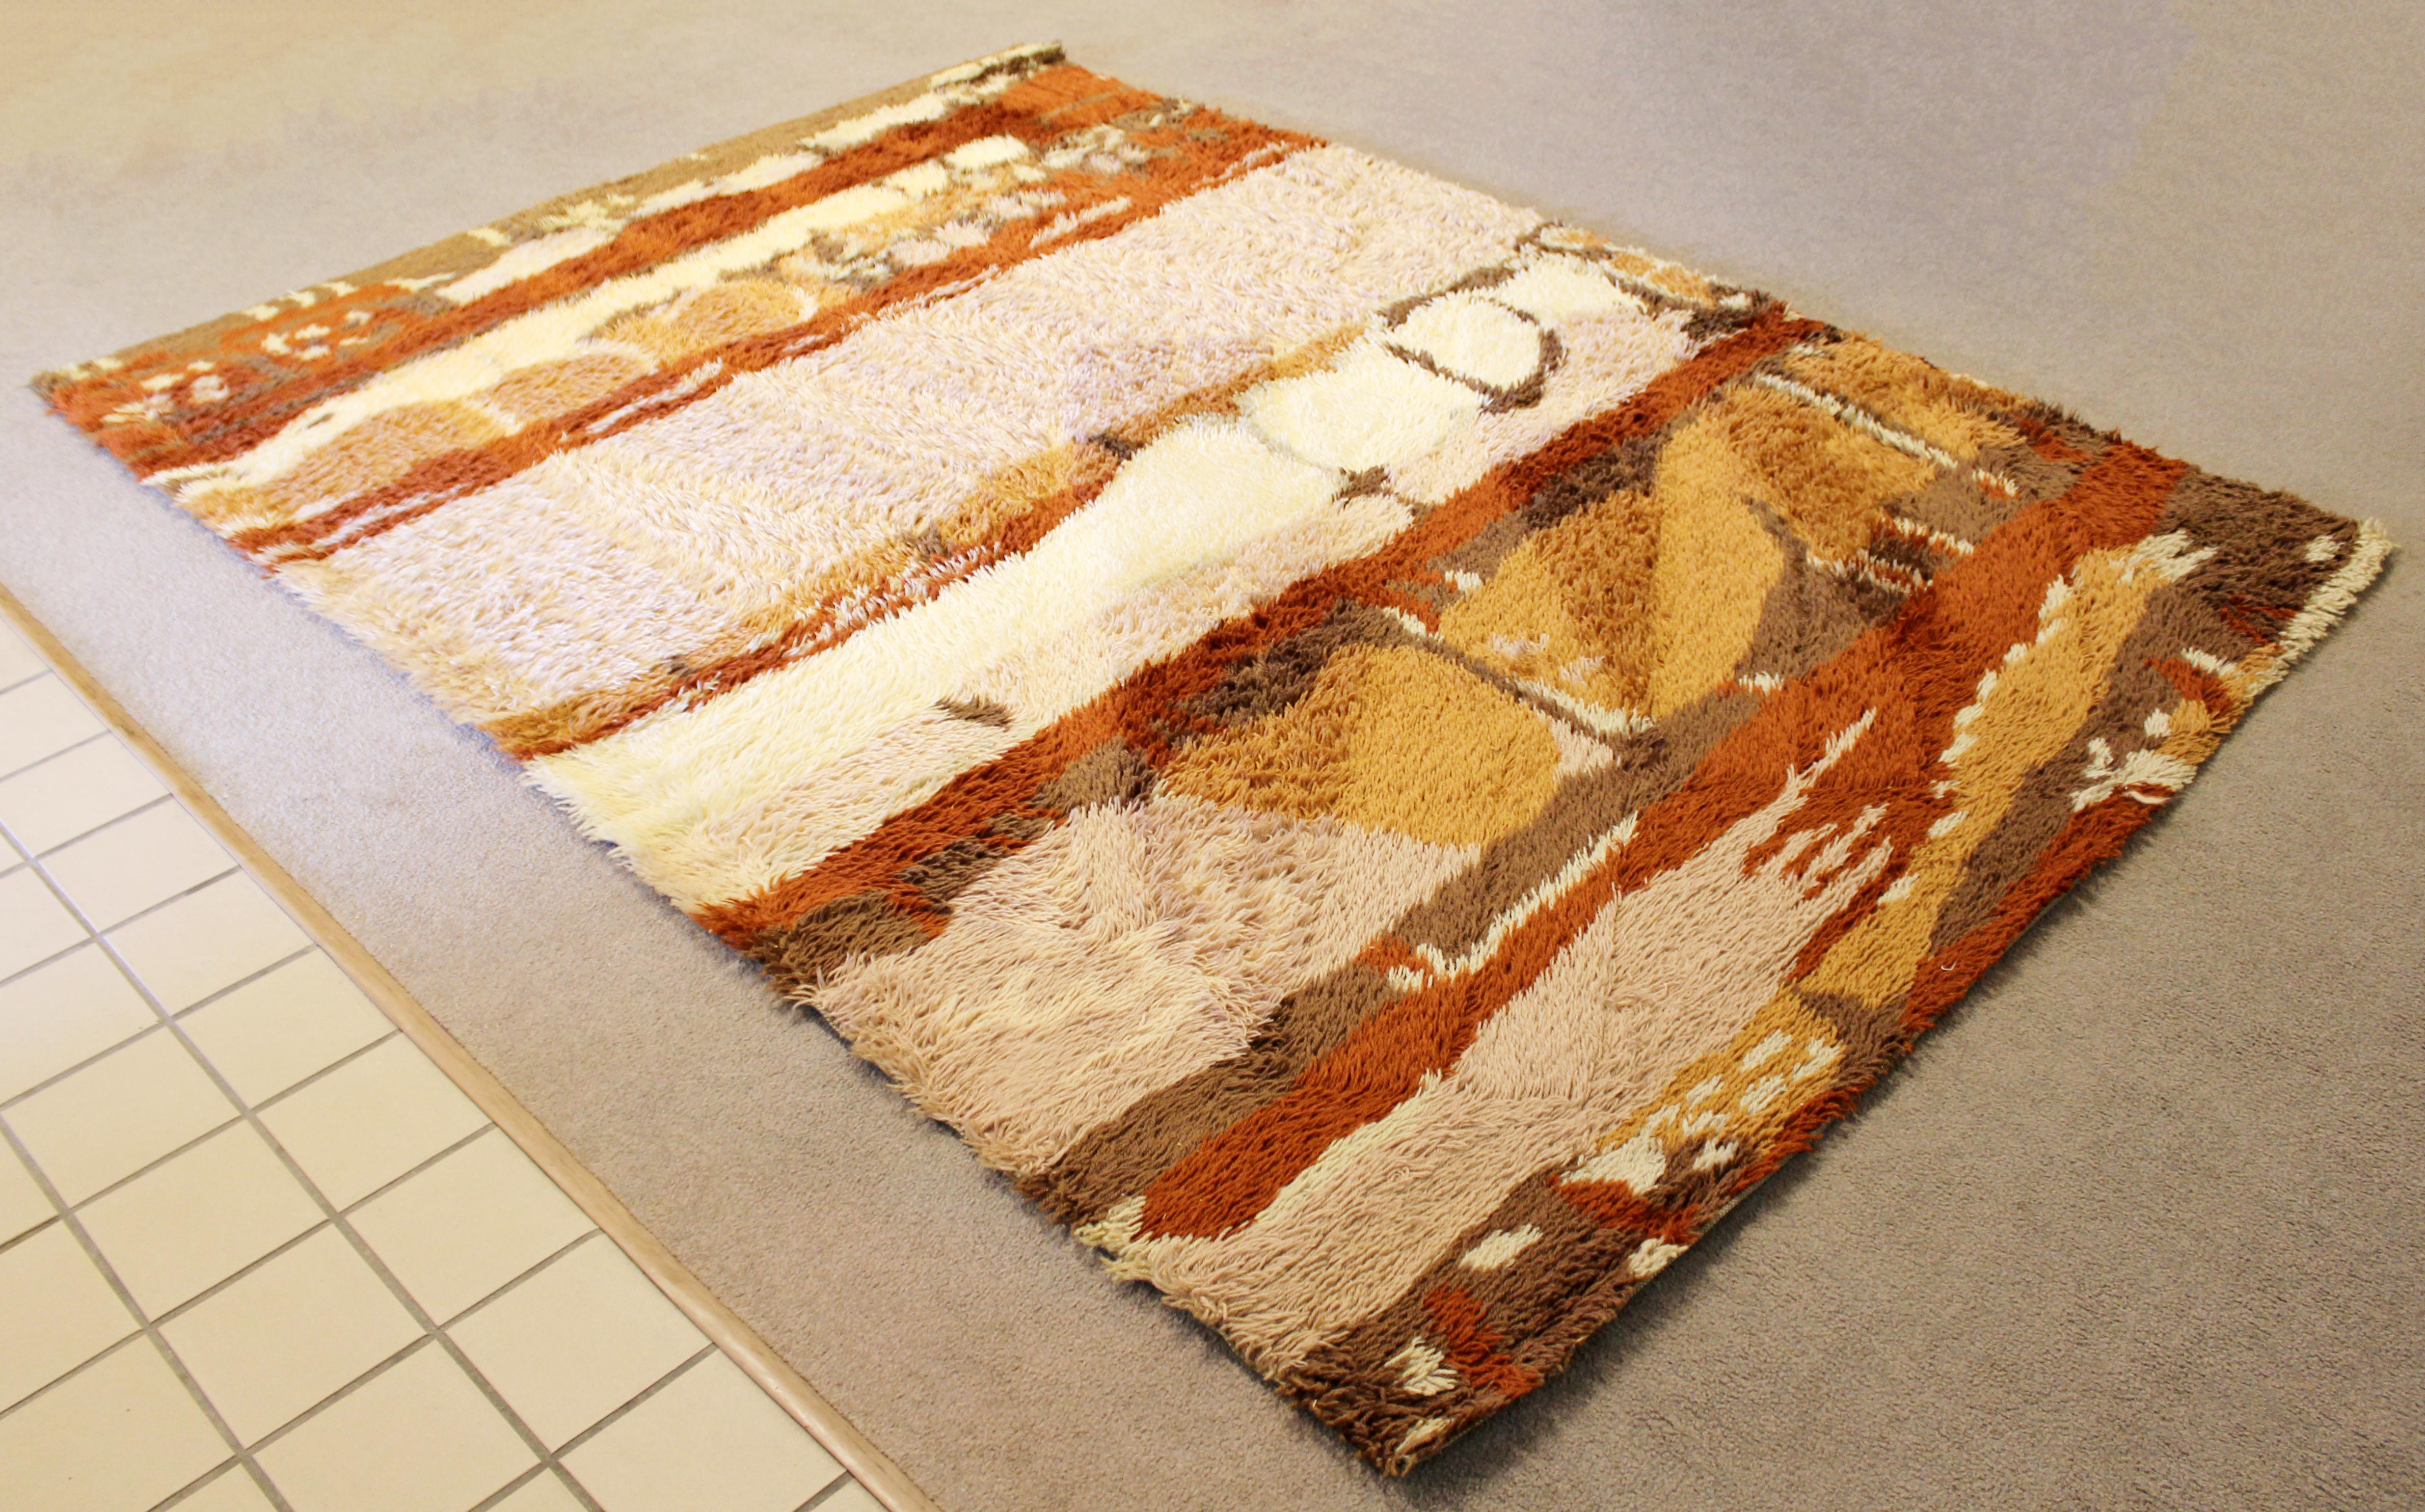 For your consideration is a vibrant, Danish, rectangular Rya area rug or carpet, with a rust, brown and cream pattern, circa 1960s. In very good condition. The dimensions are 72